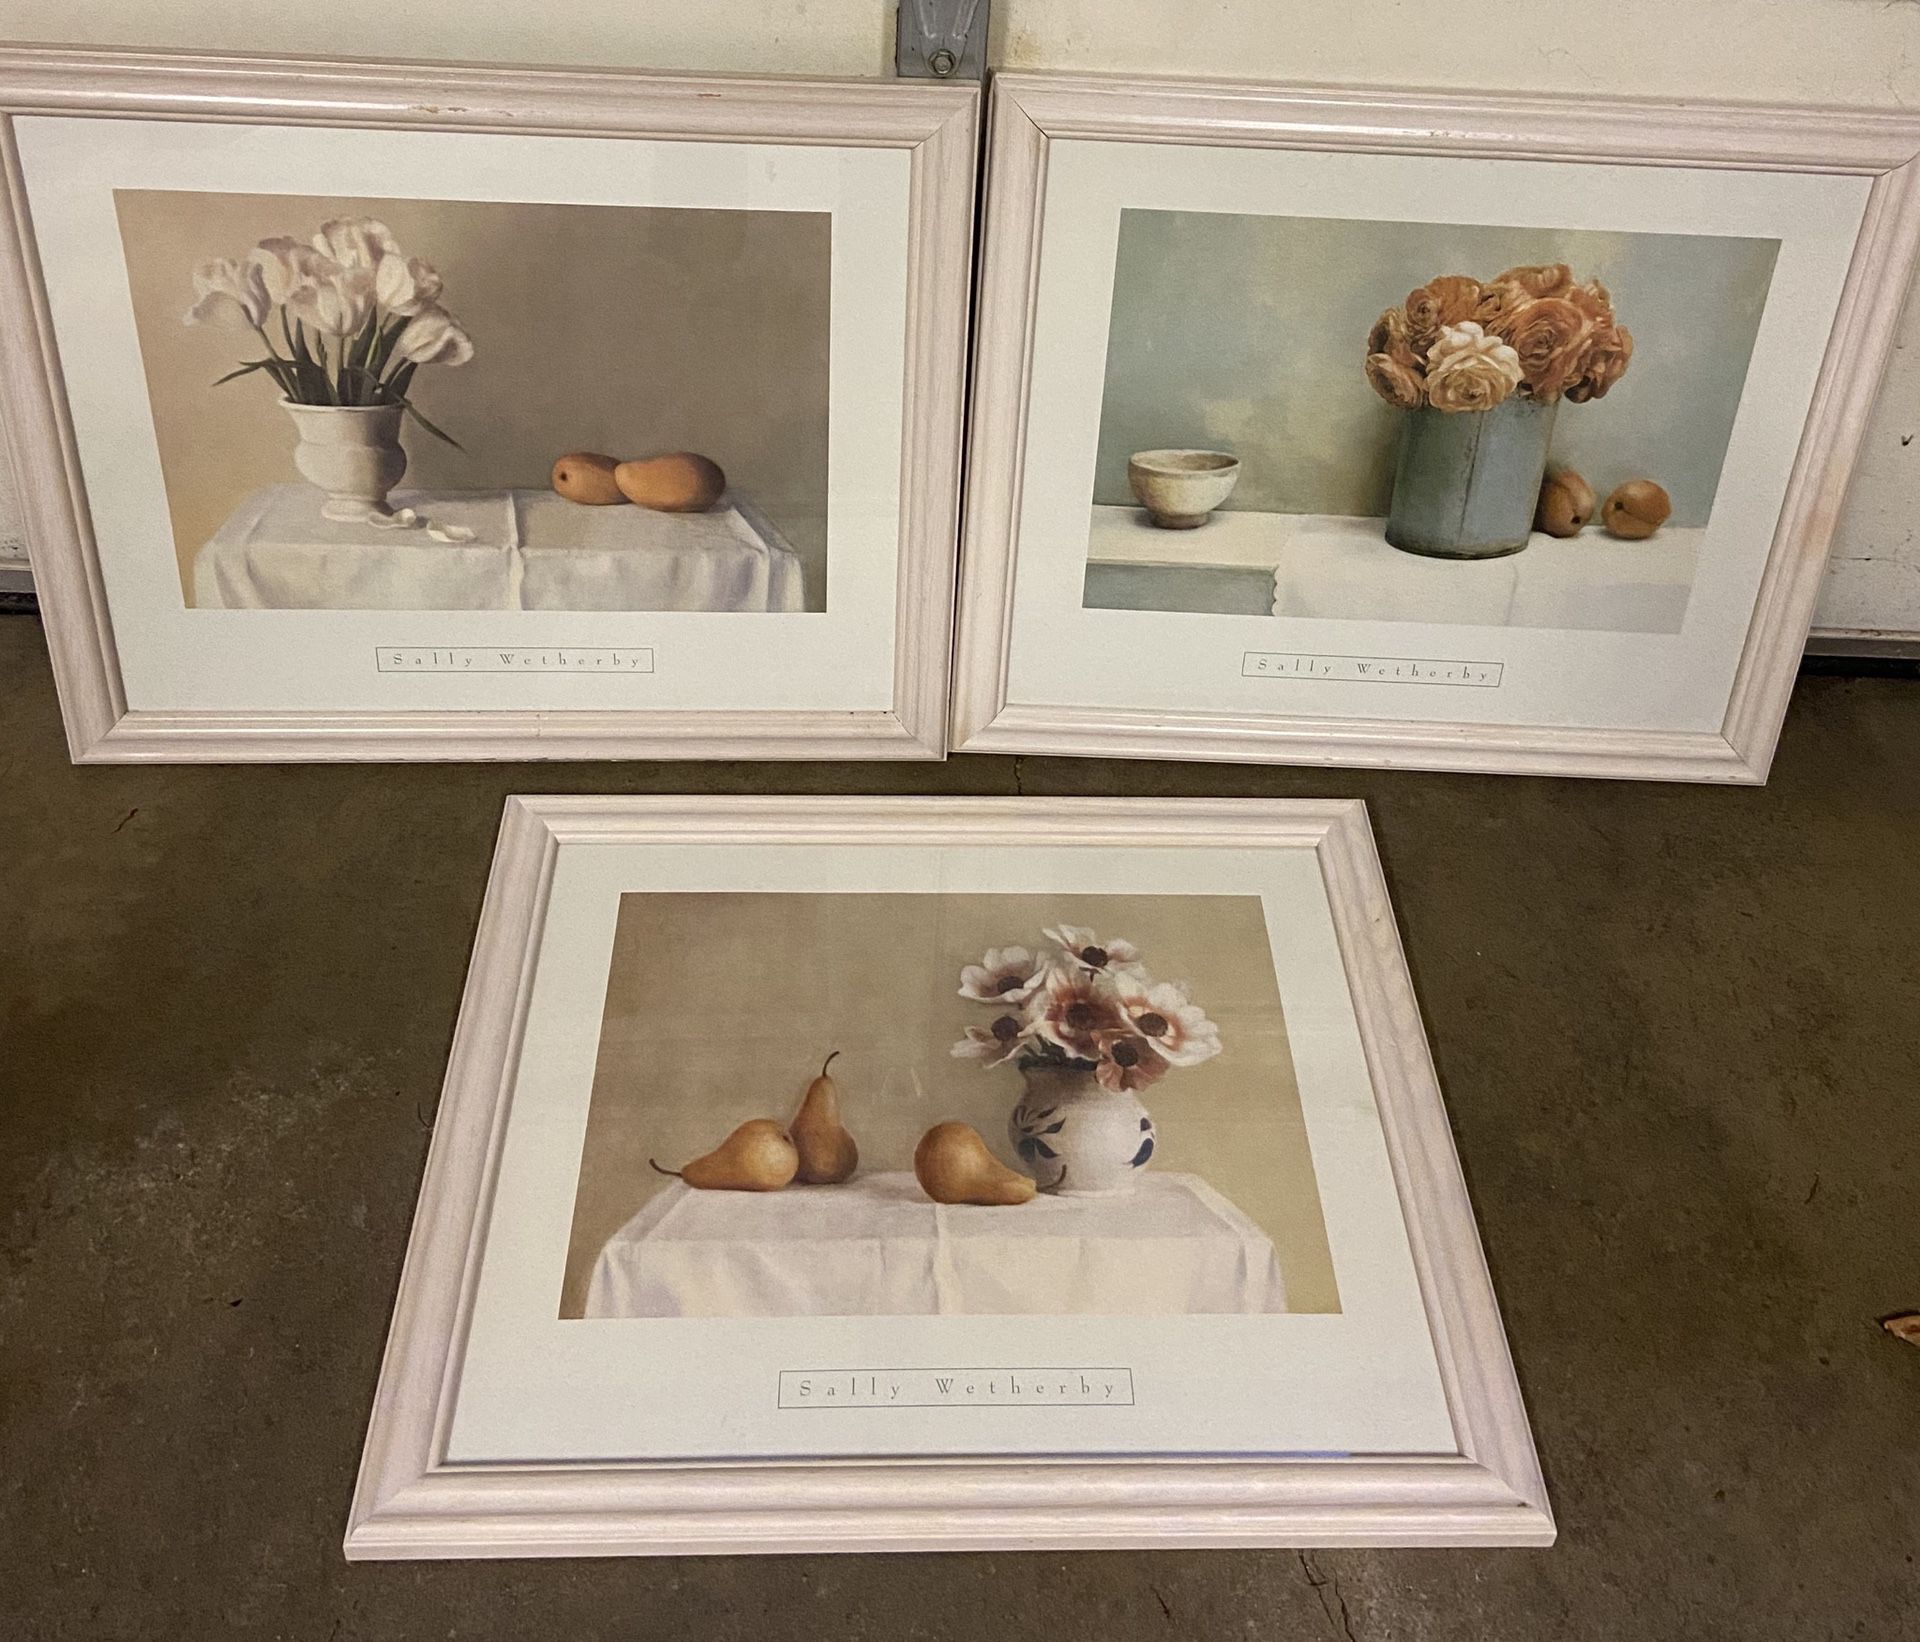 Framed wall art / wood framed pictures, 19” x 22 3/4”, $5 each